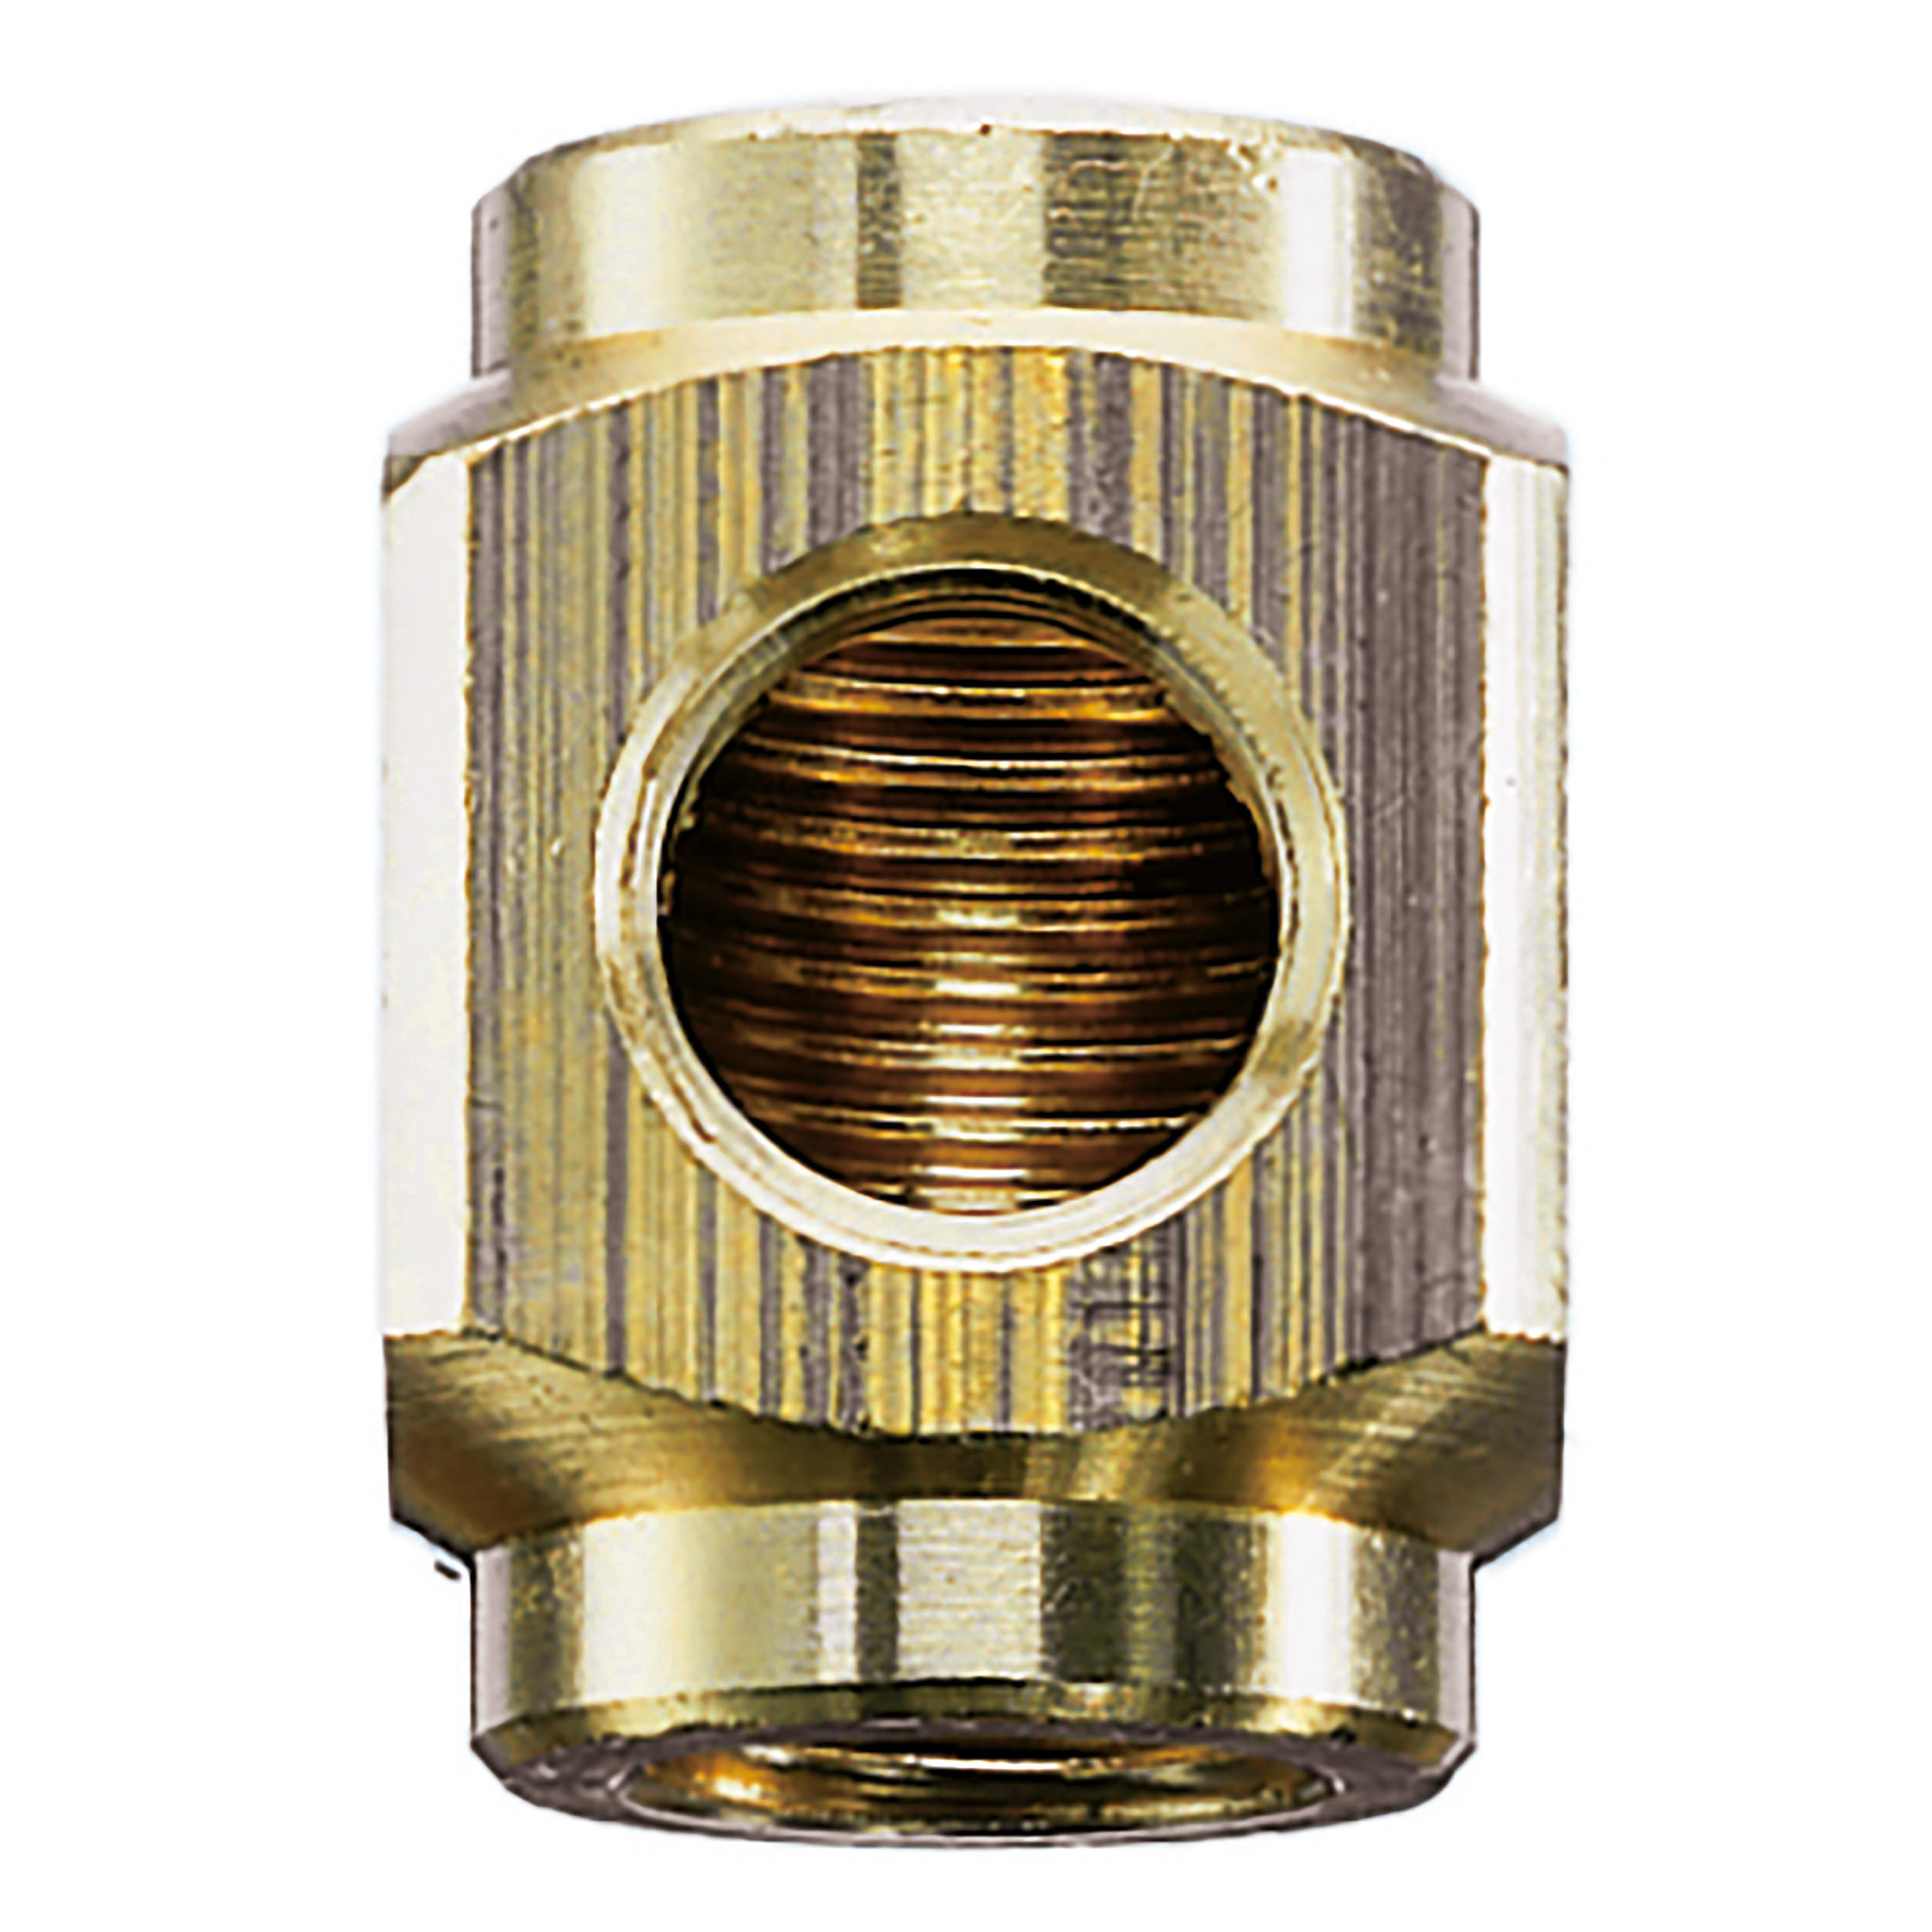 T-distributor, connection: G¼, length: 30 mm, height: 22 mm, AF 22 mm, max. operating pressure 580 psi, brass, nickel-plated